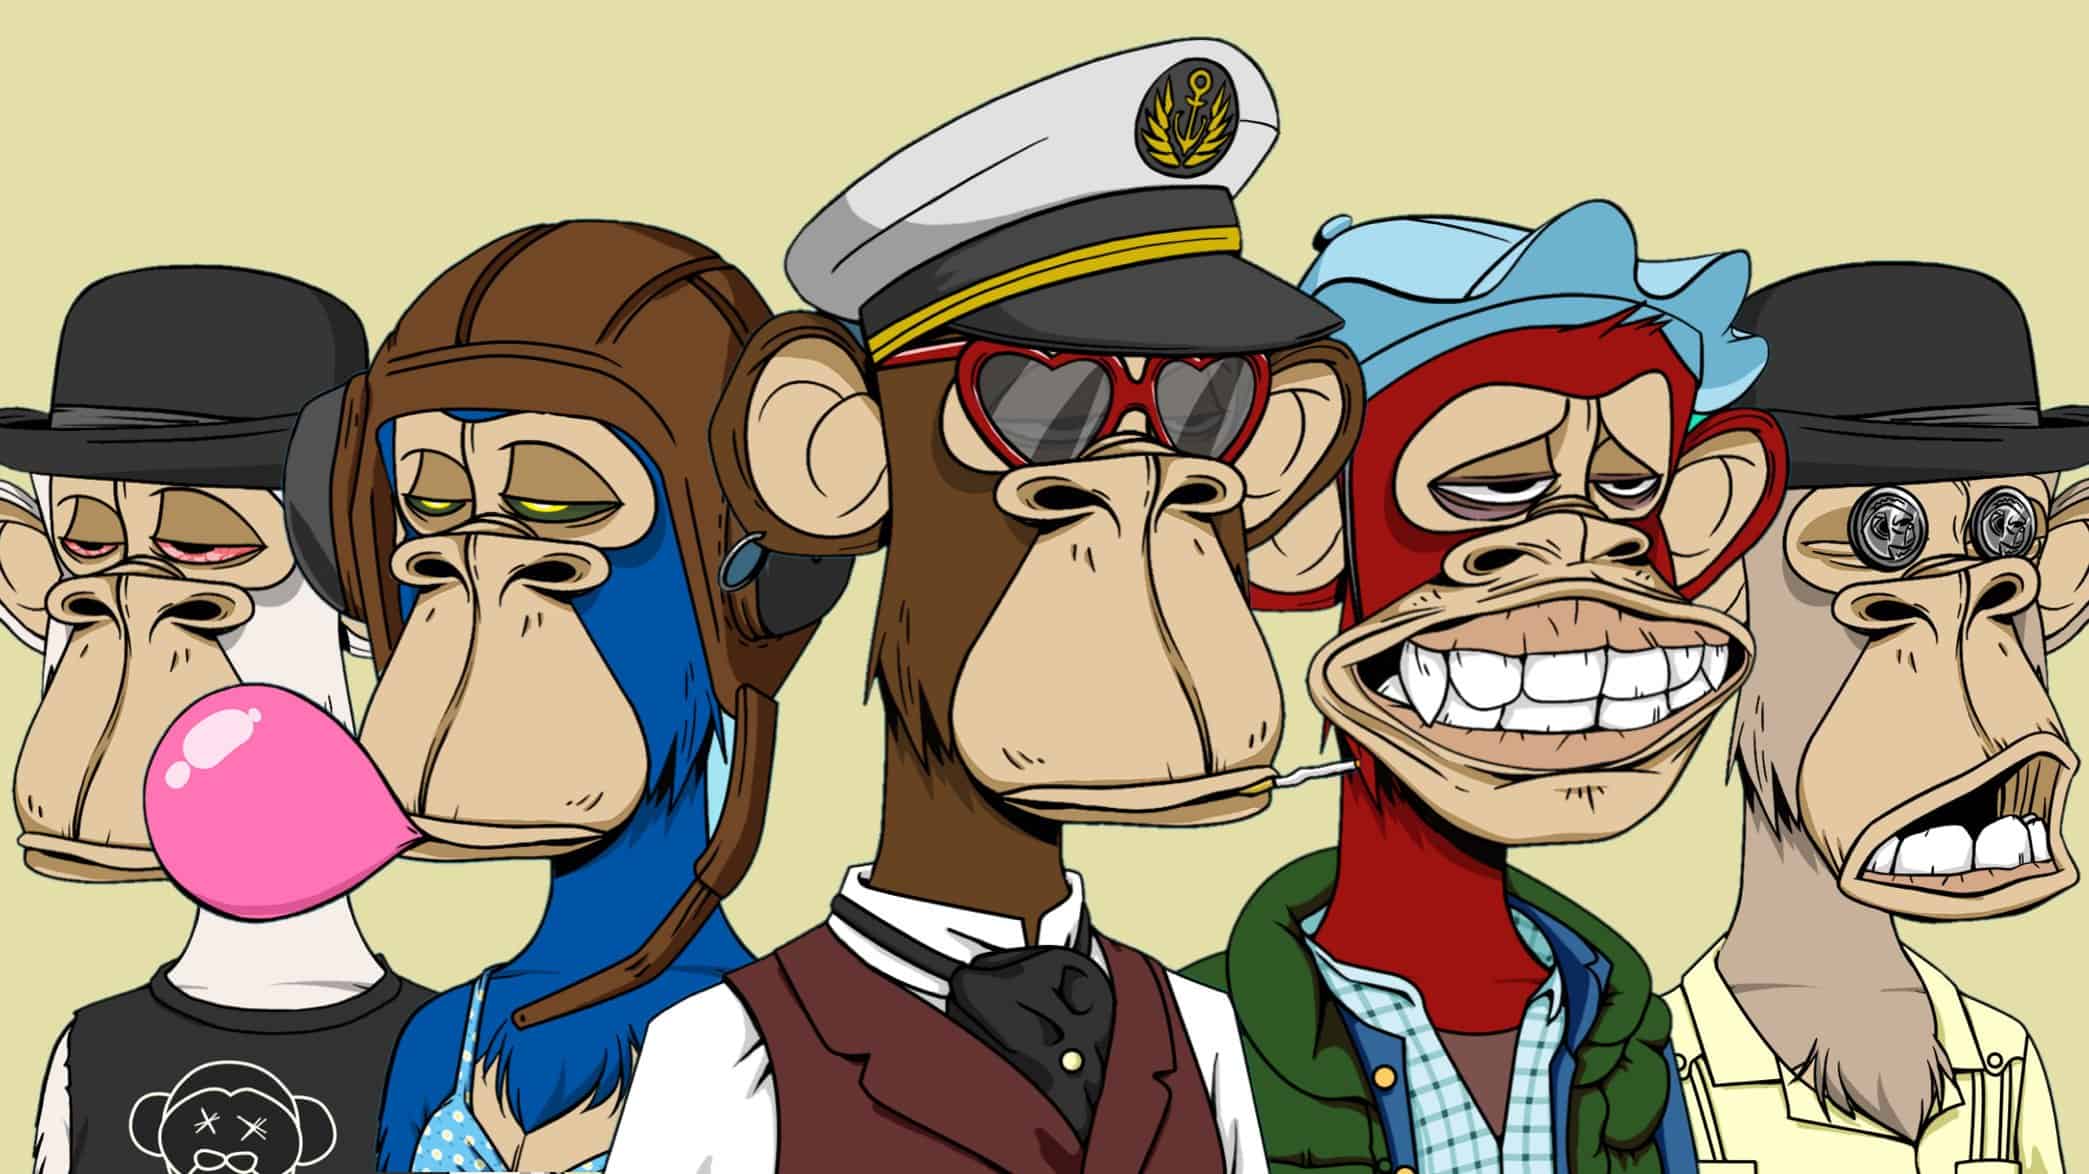 Bored Ape Yacht Club creators are reportedly in funding talks with Andreessen Horowitz: Report